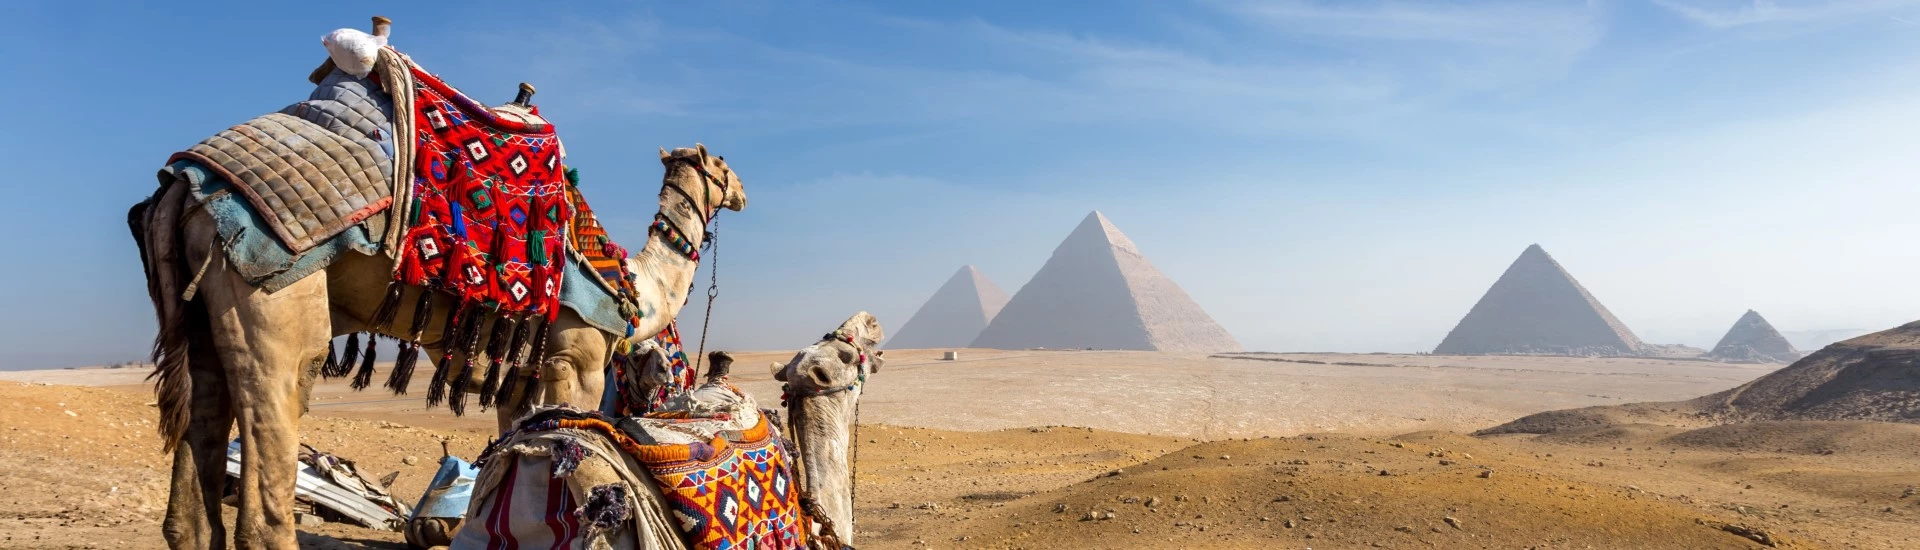 Egypt - Two camels looking towards the Pyramids of Giza